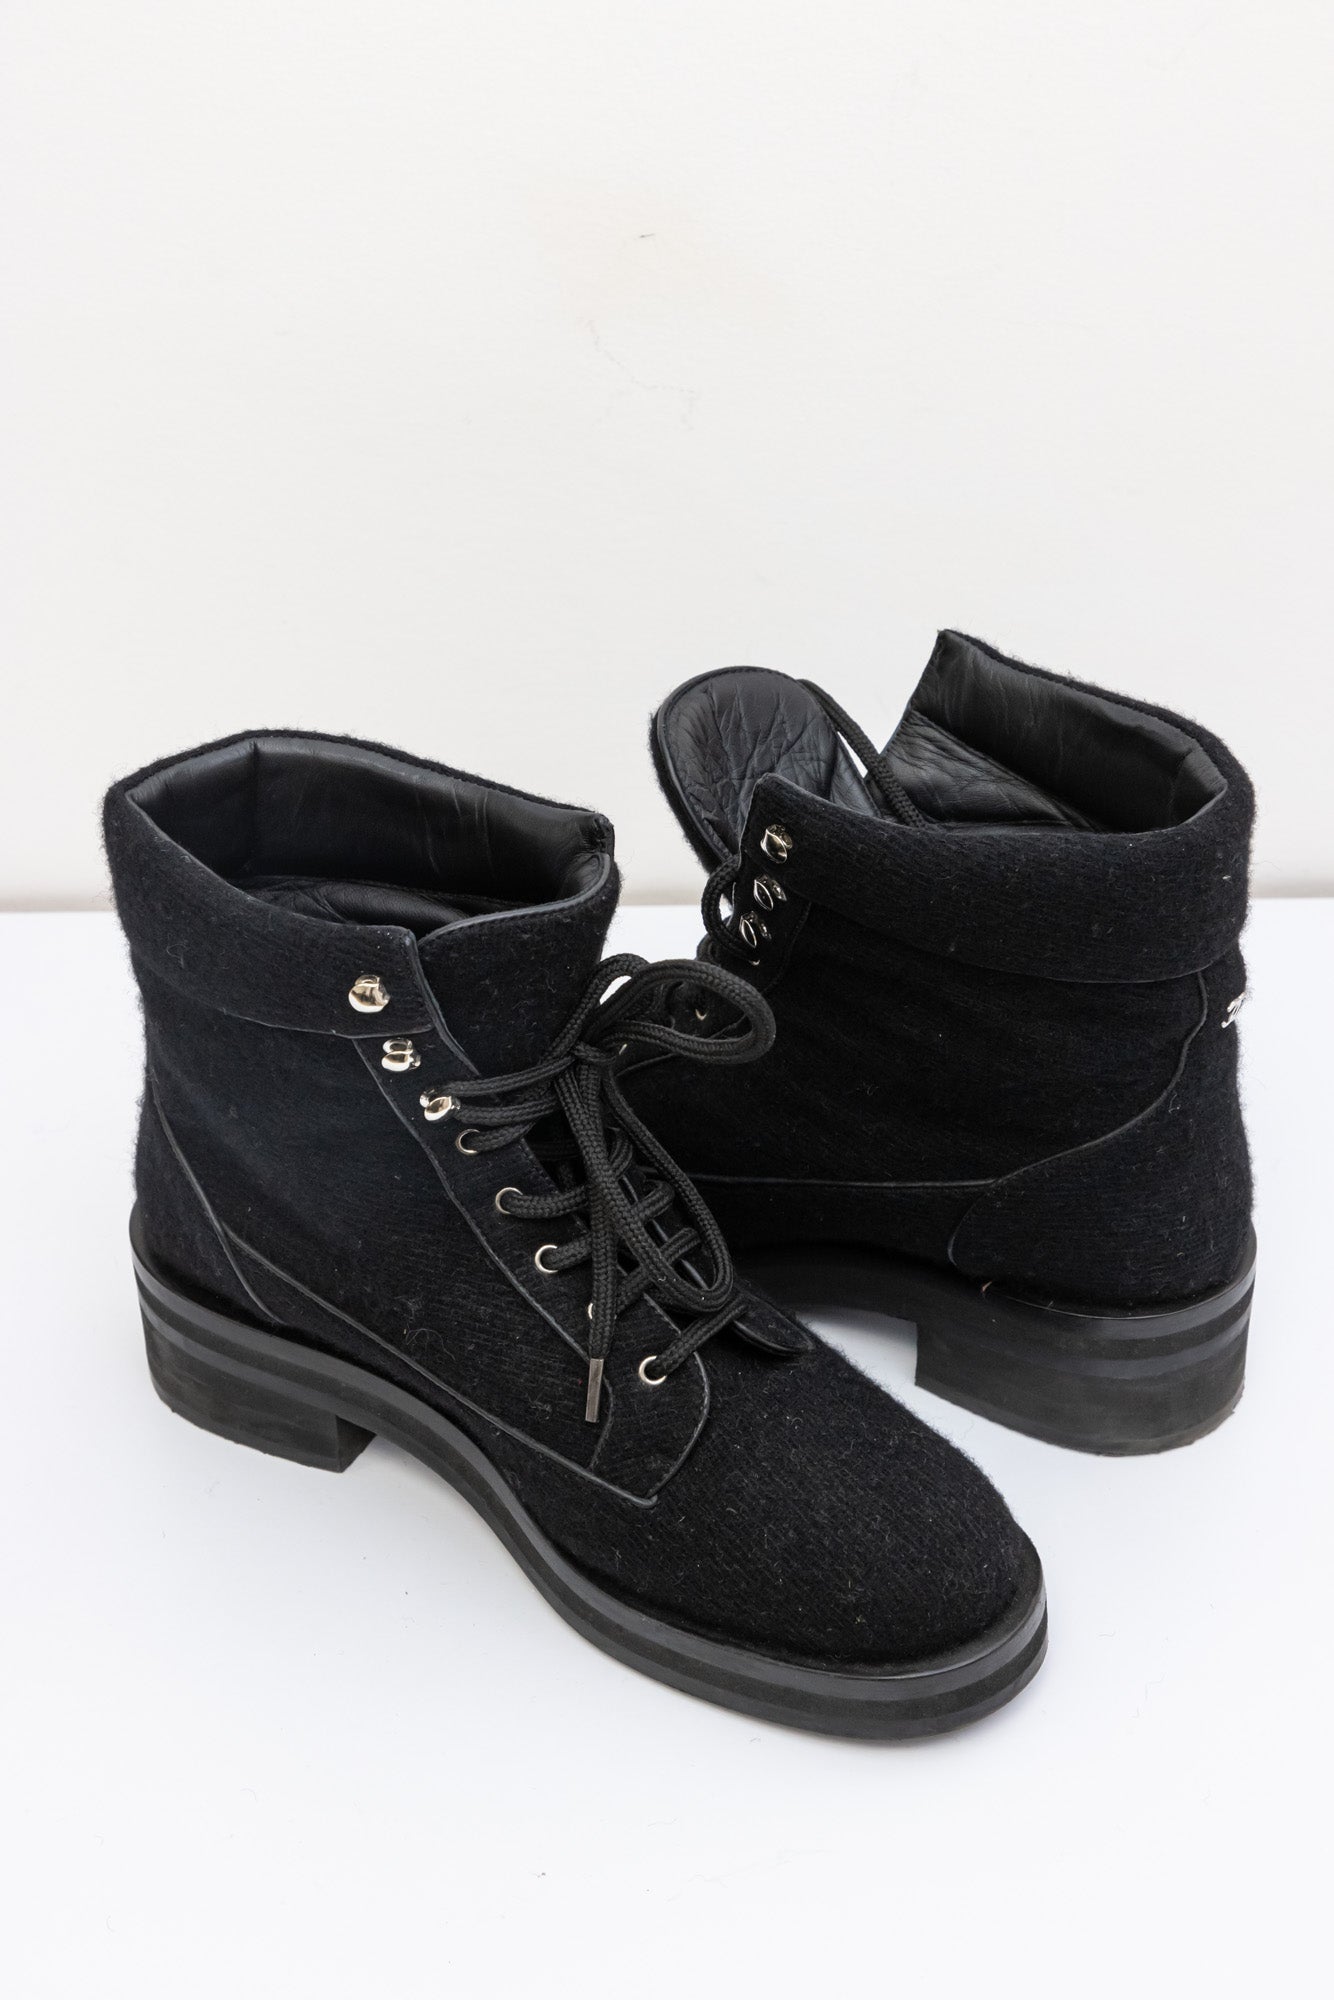 Chanel Black Quilted Wool lace up Ankle Boots 